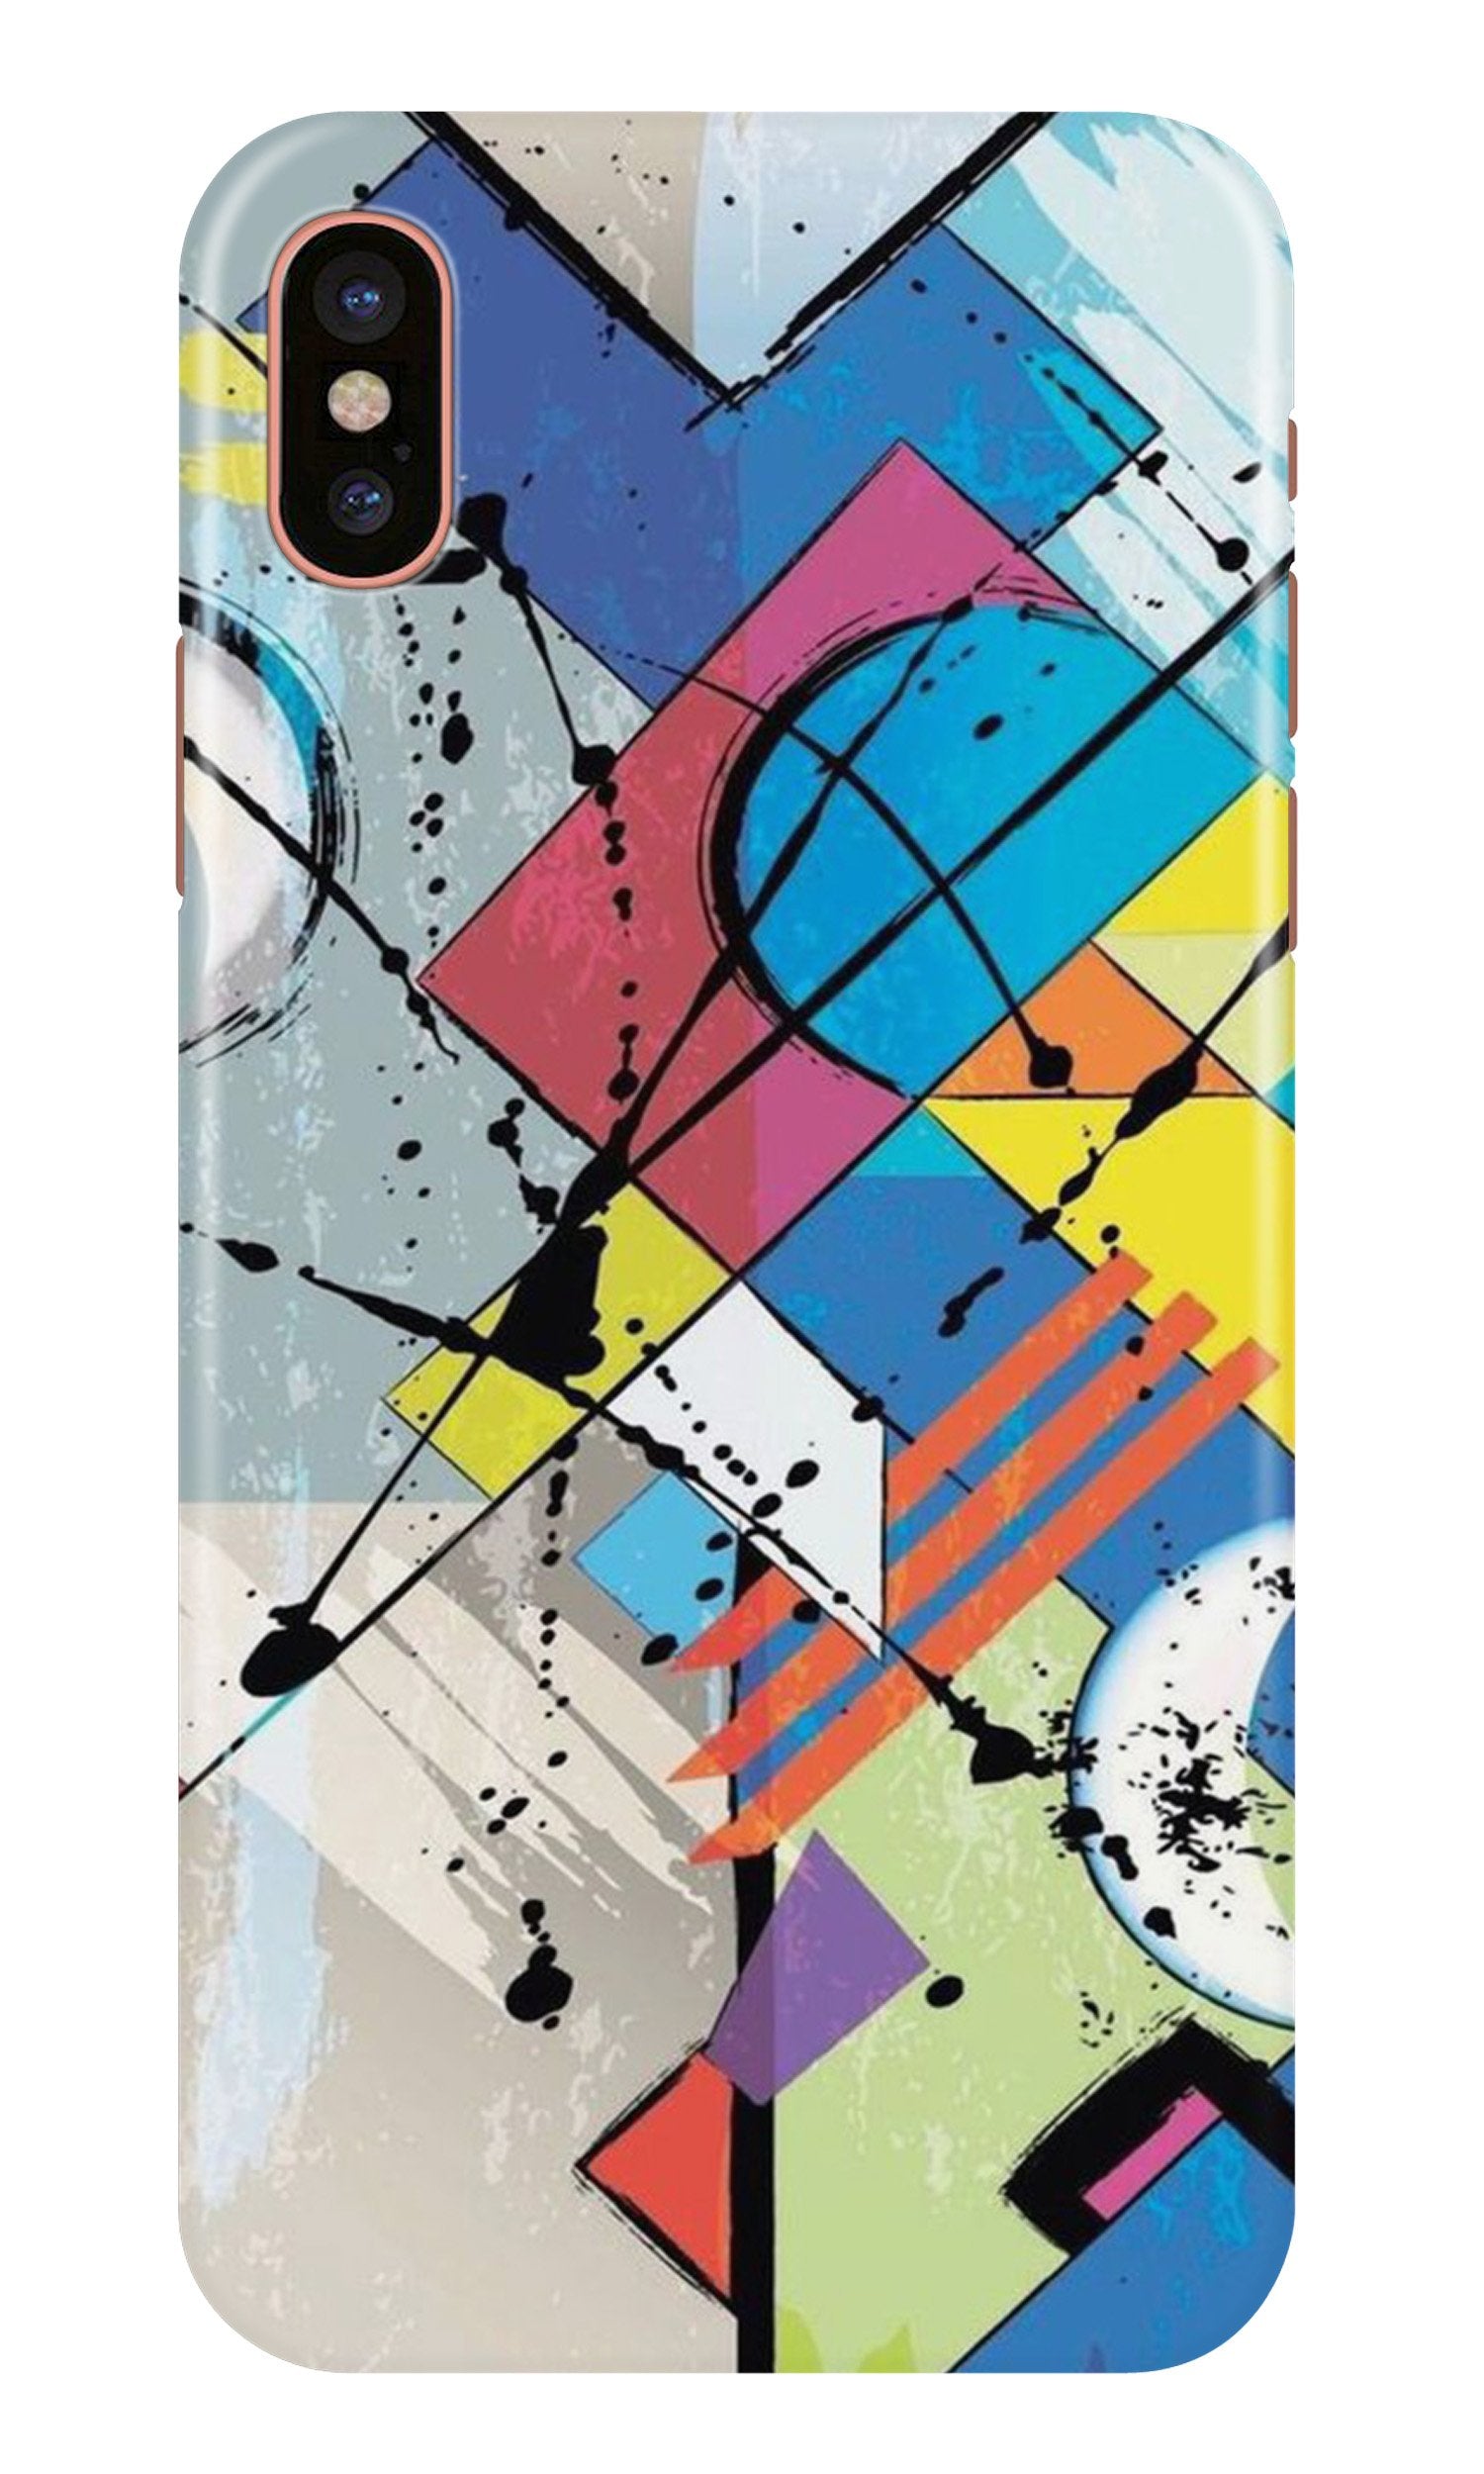 Modern Art Case for iPhone Xs Max (Design No. 235)